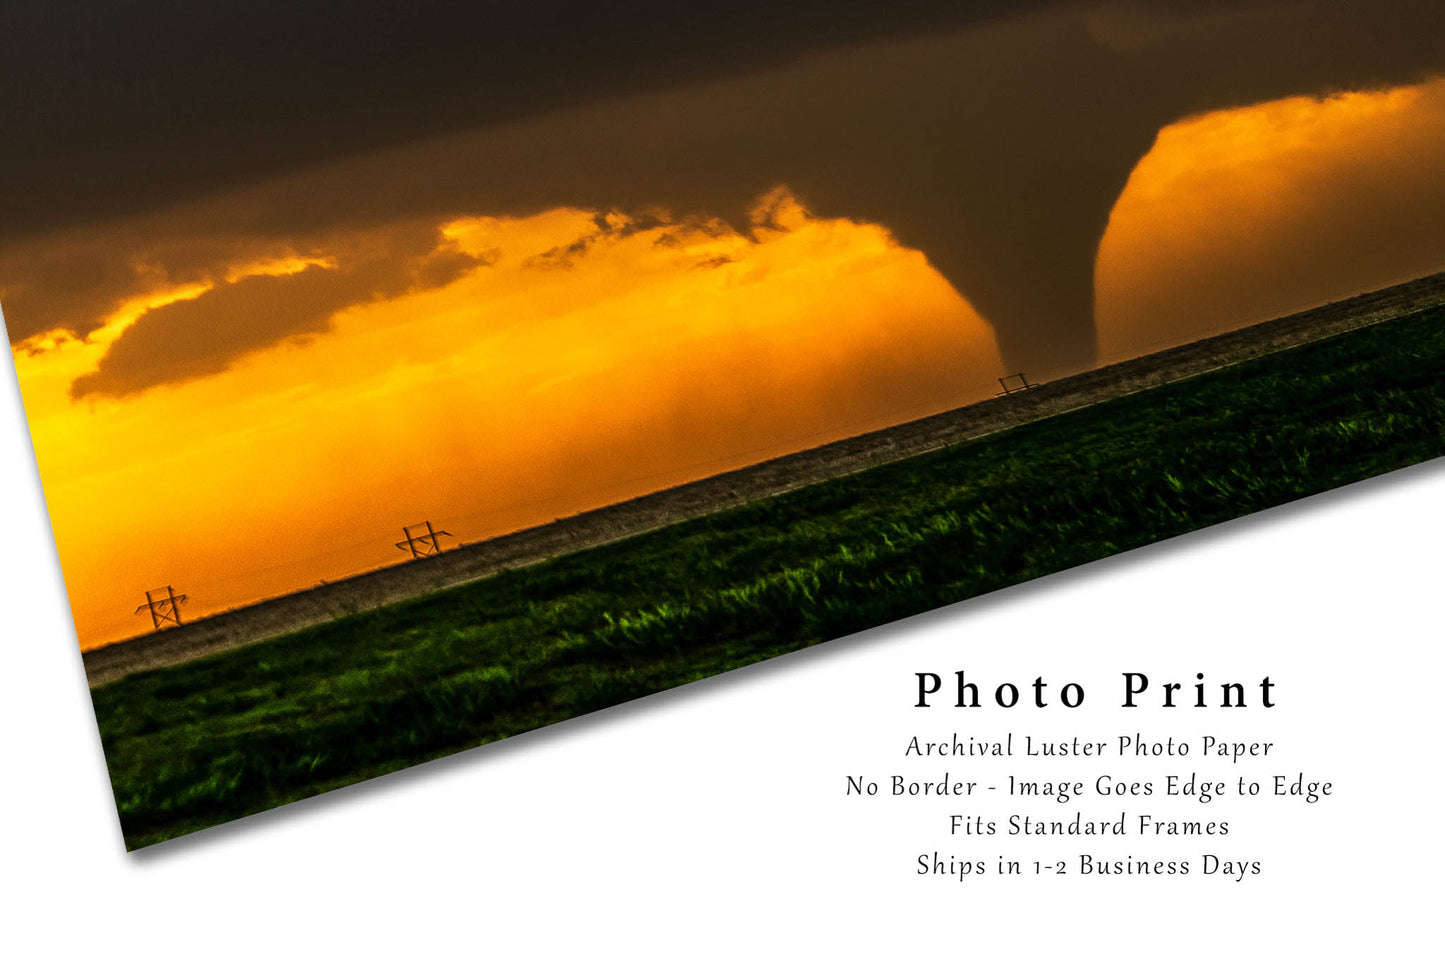 Storm Photography Print (Not Framed) Picture of Large Tornado Appearing as Silhouette Against Evening Sky at Sunset in Kansas Thunderstorm Wall Art Weather Decor